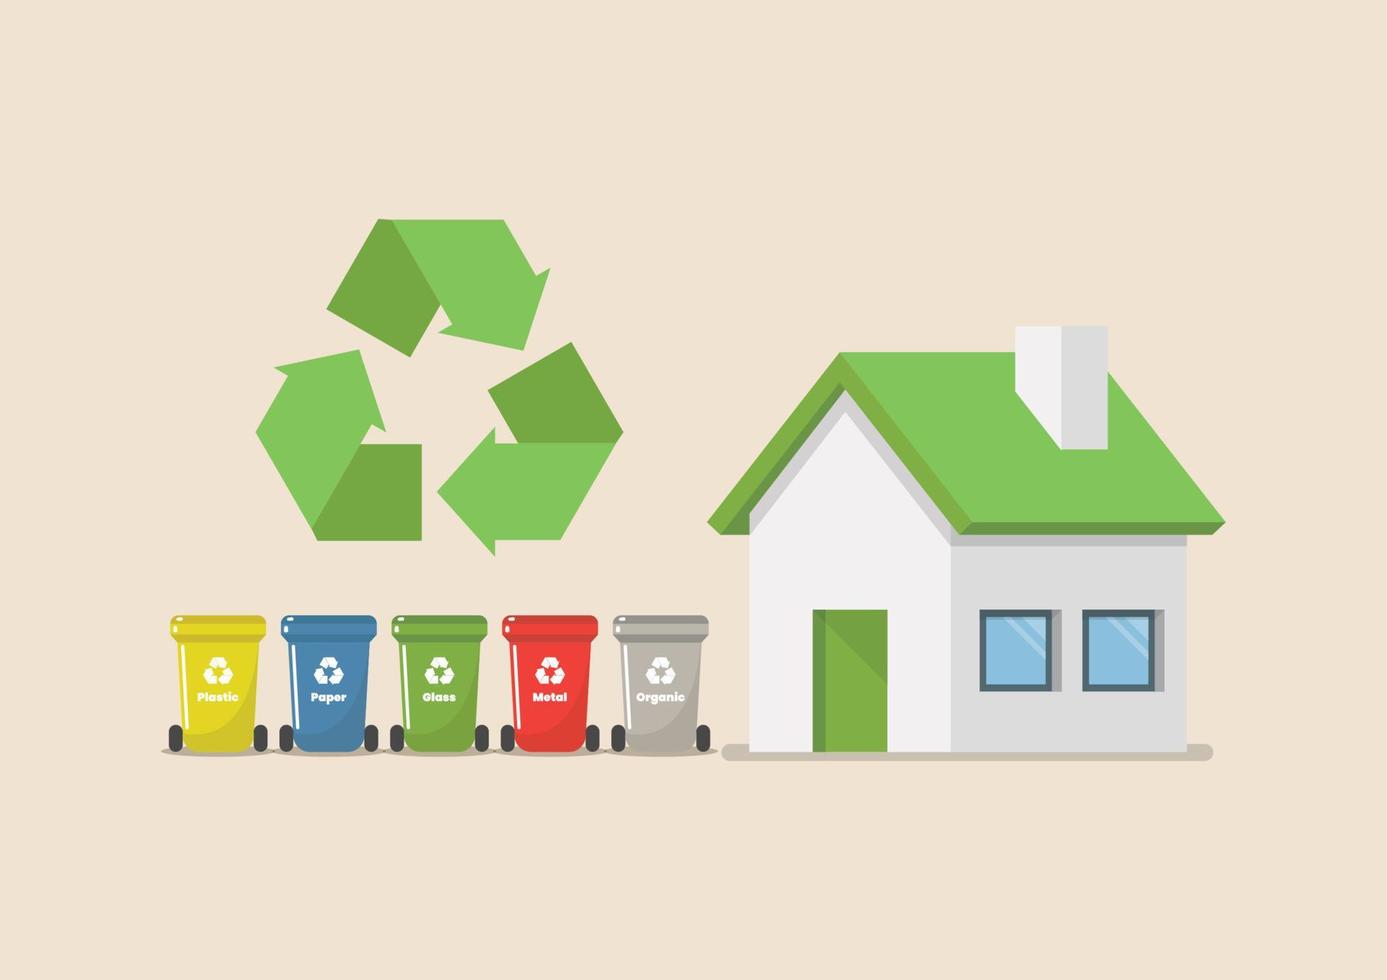 Recycle bins set with eco house vector